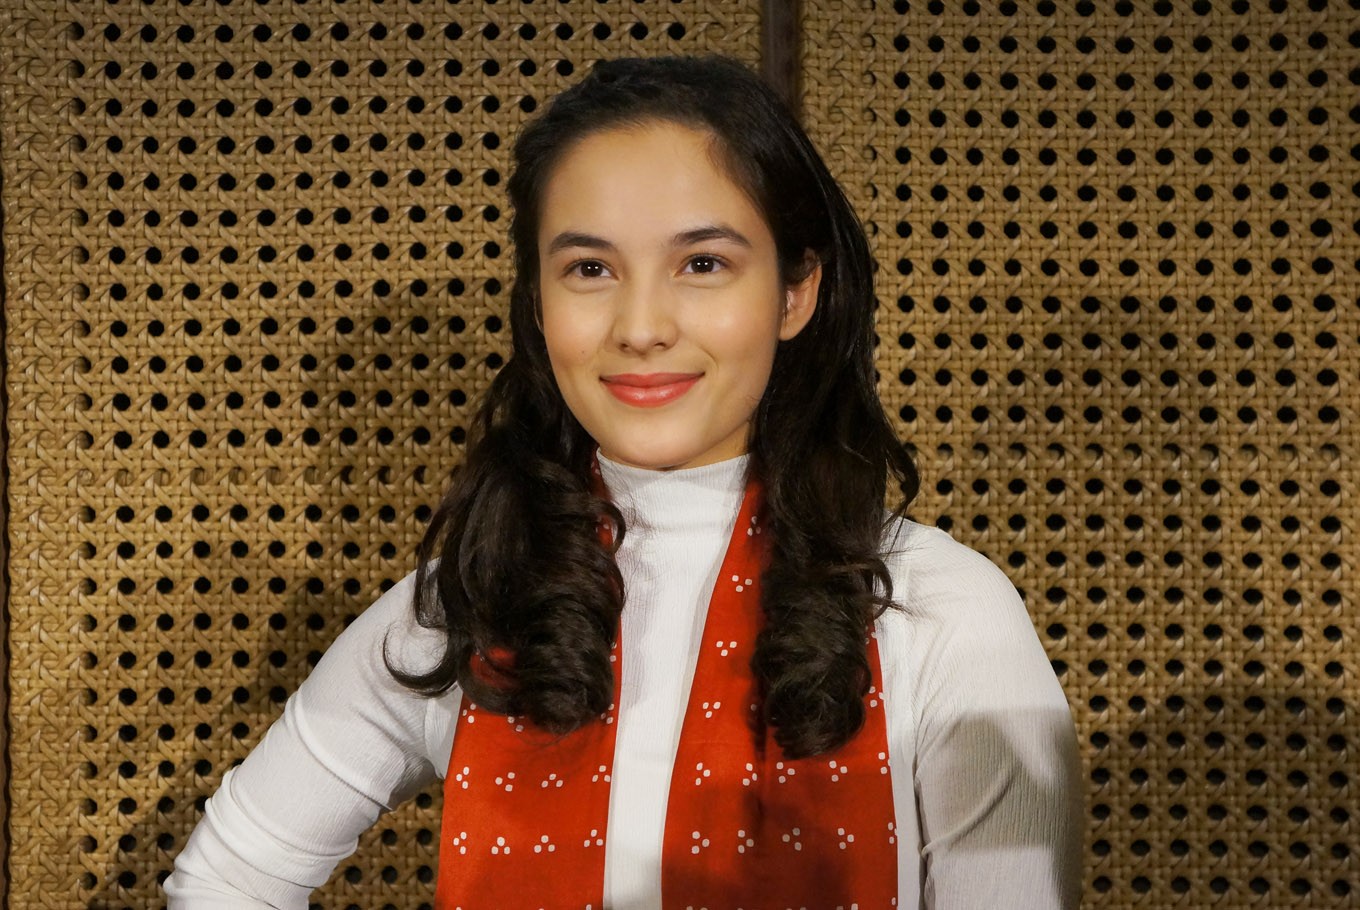 Actress Chelsea Islan encourages young people to join theater